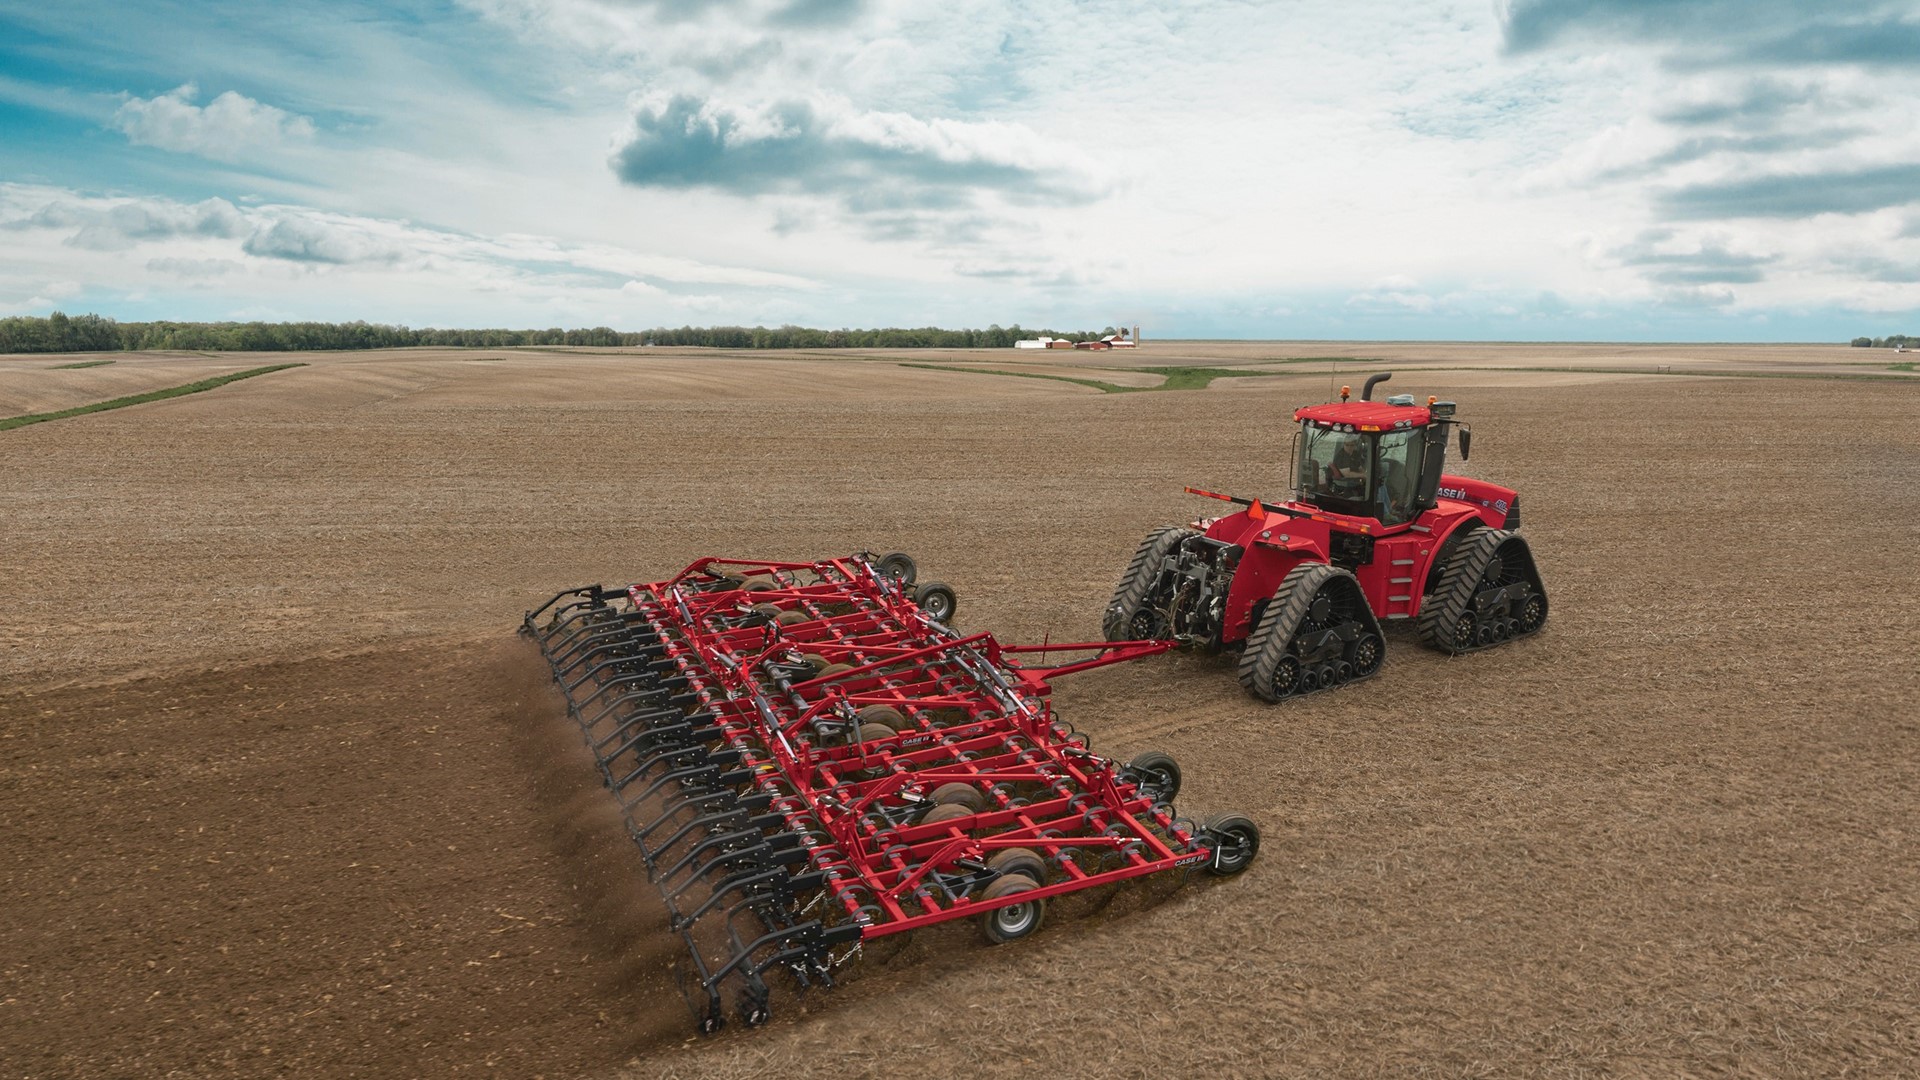 Designed to effectively work tough high-clay and timber soils, the Case IH Vibra-Tine™ 265 S-tine field cultivator